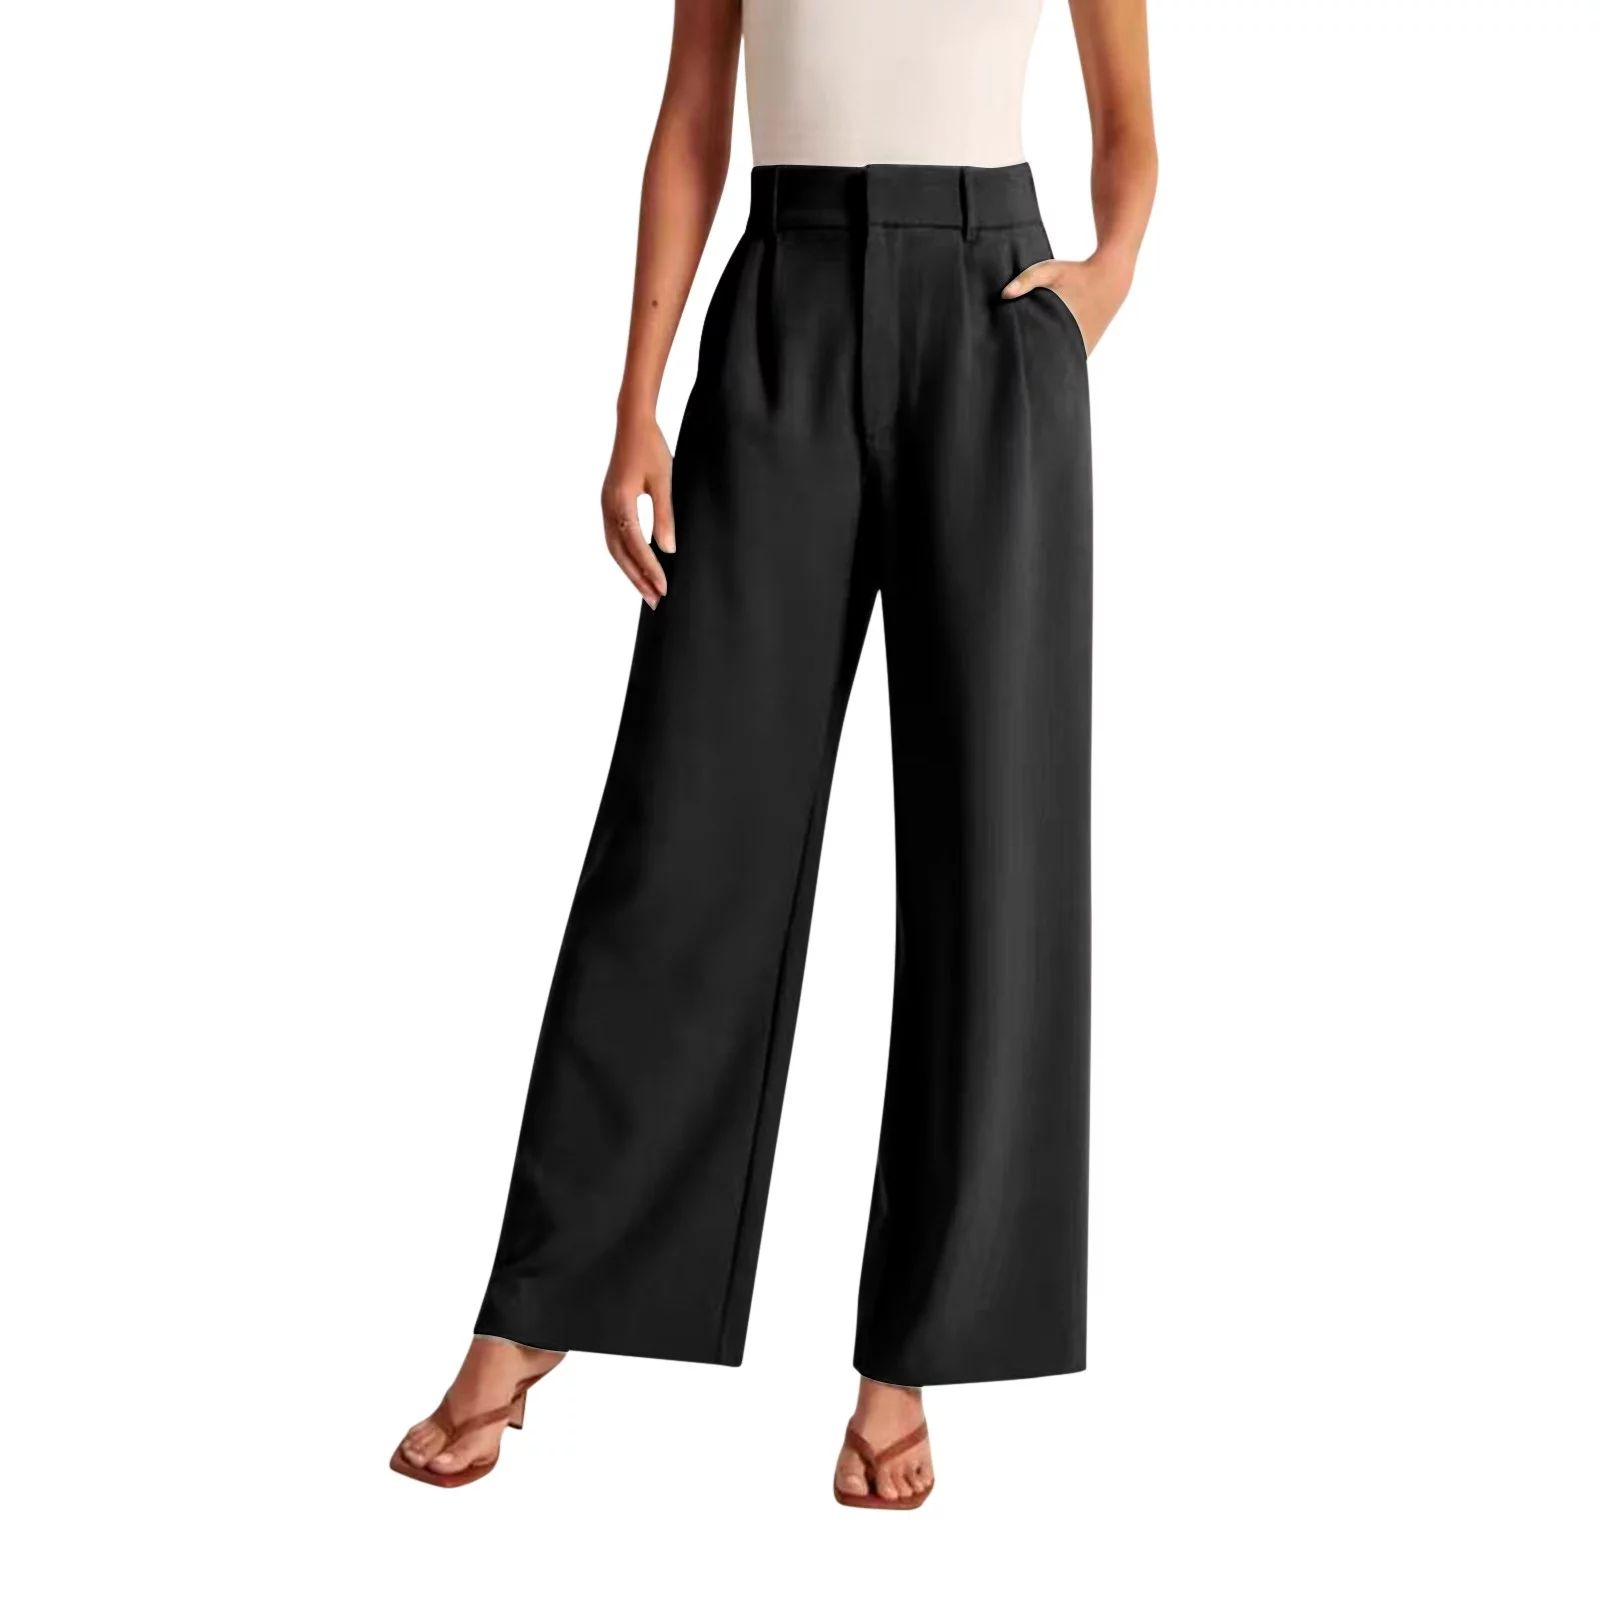 Trousers for Women Wide Leg for Work Business Casual High Waisted Dress Flowy office Pants | Walmart (US)